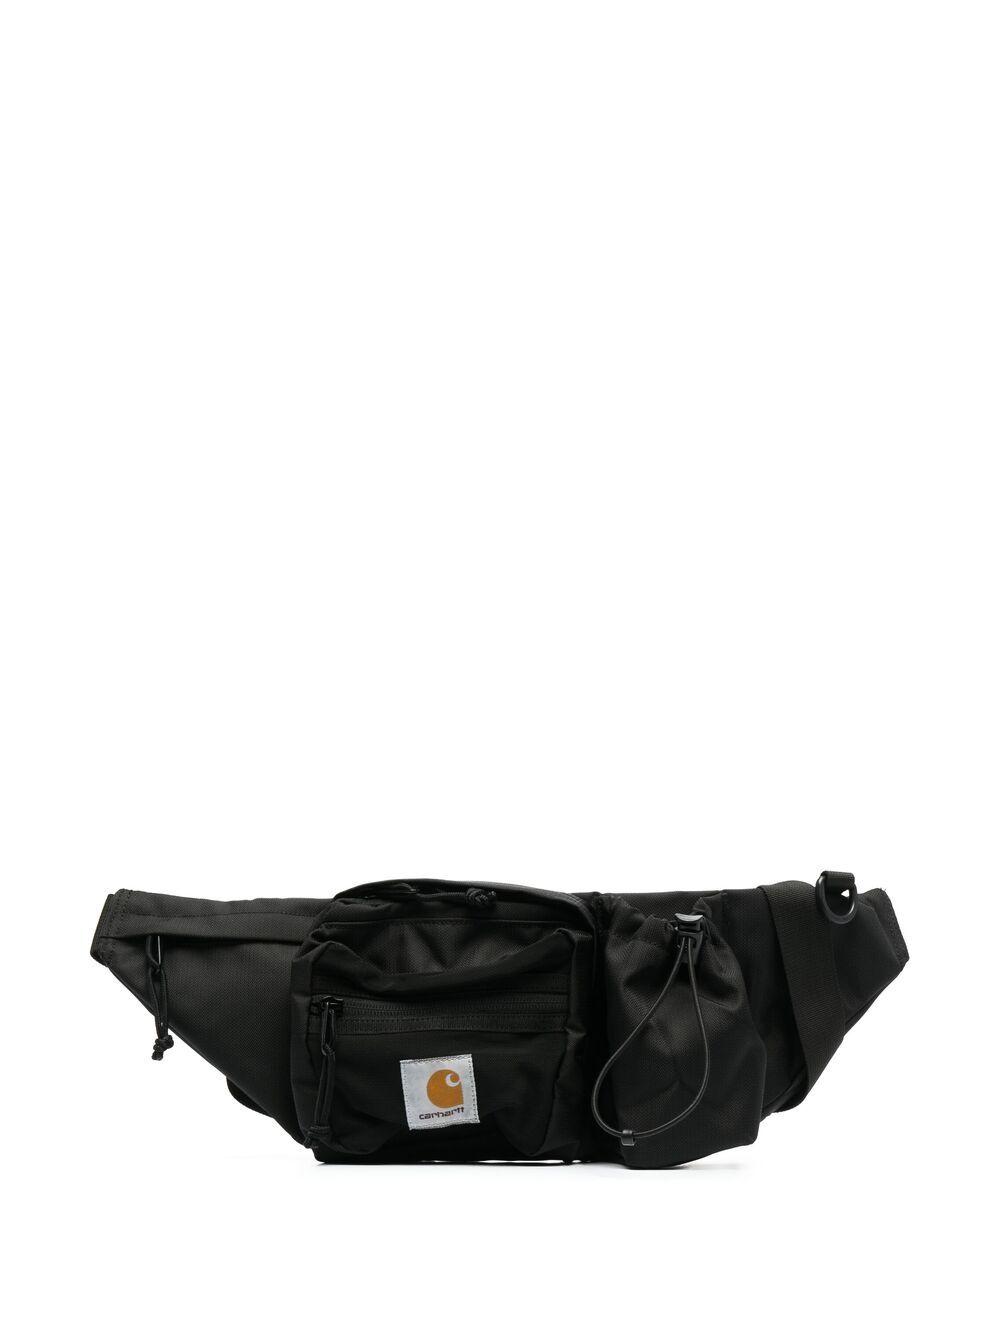 size? - The Carhartt WIP Delta Belt Bag. Available online and in